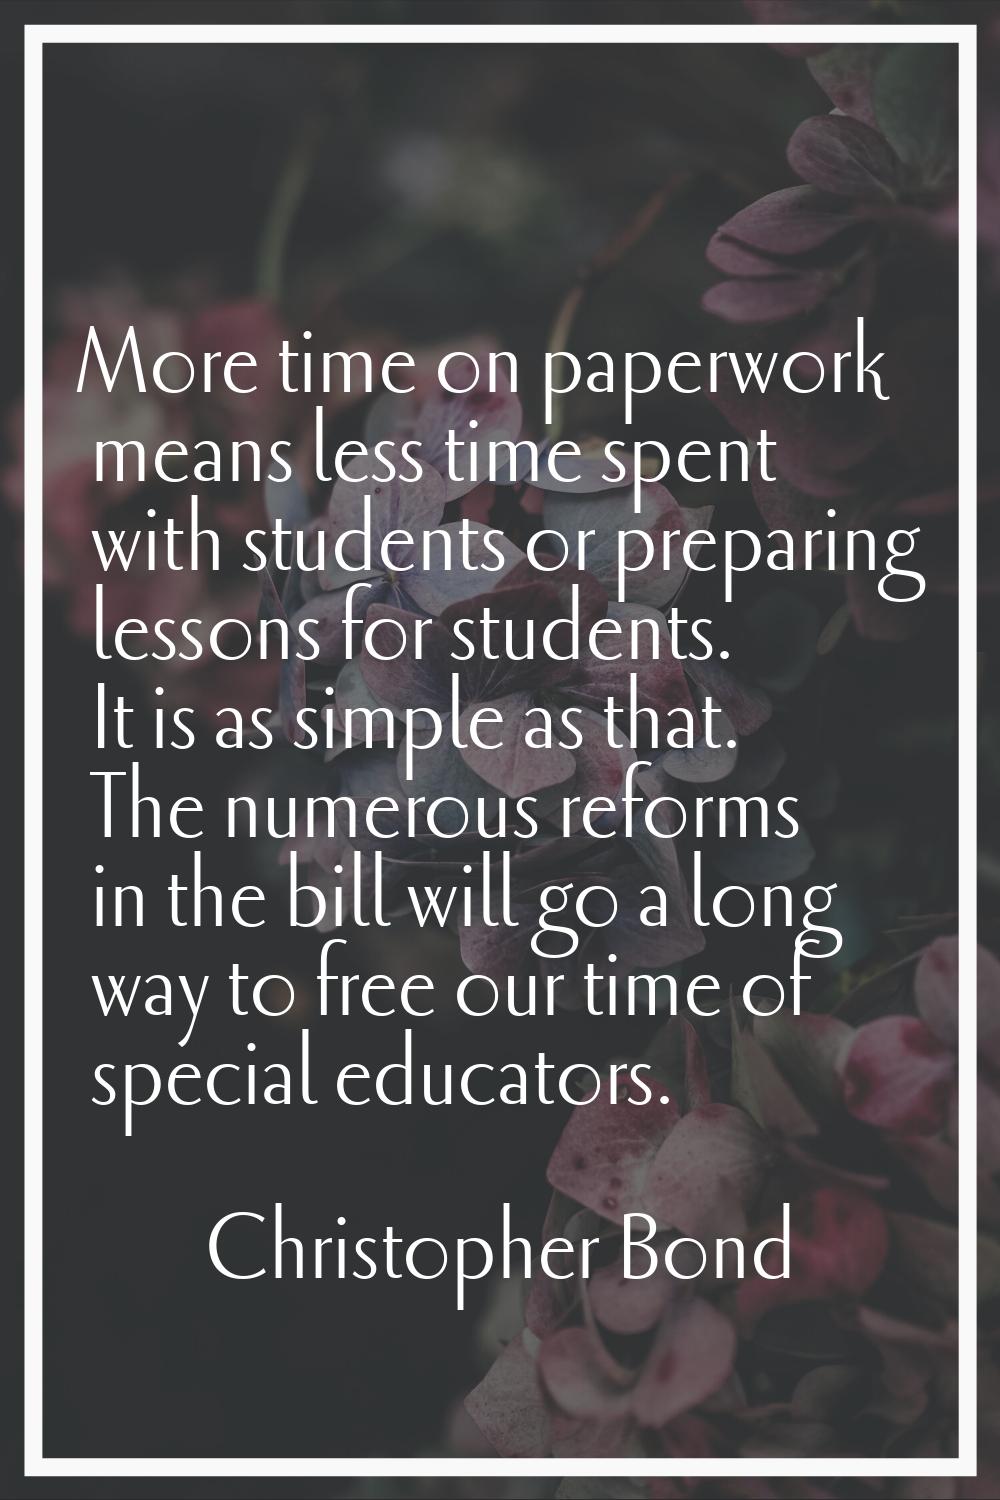 More time on paperwork means less time spent with students or preparing lessons for students. It is